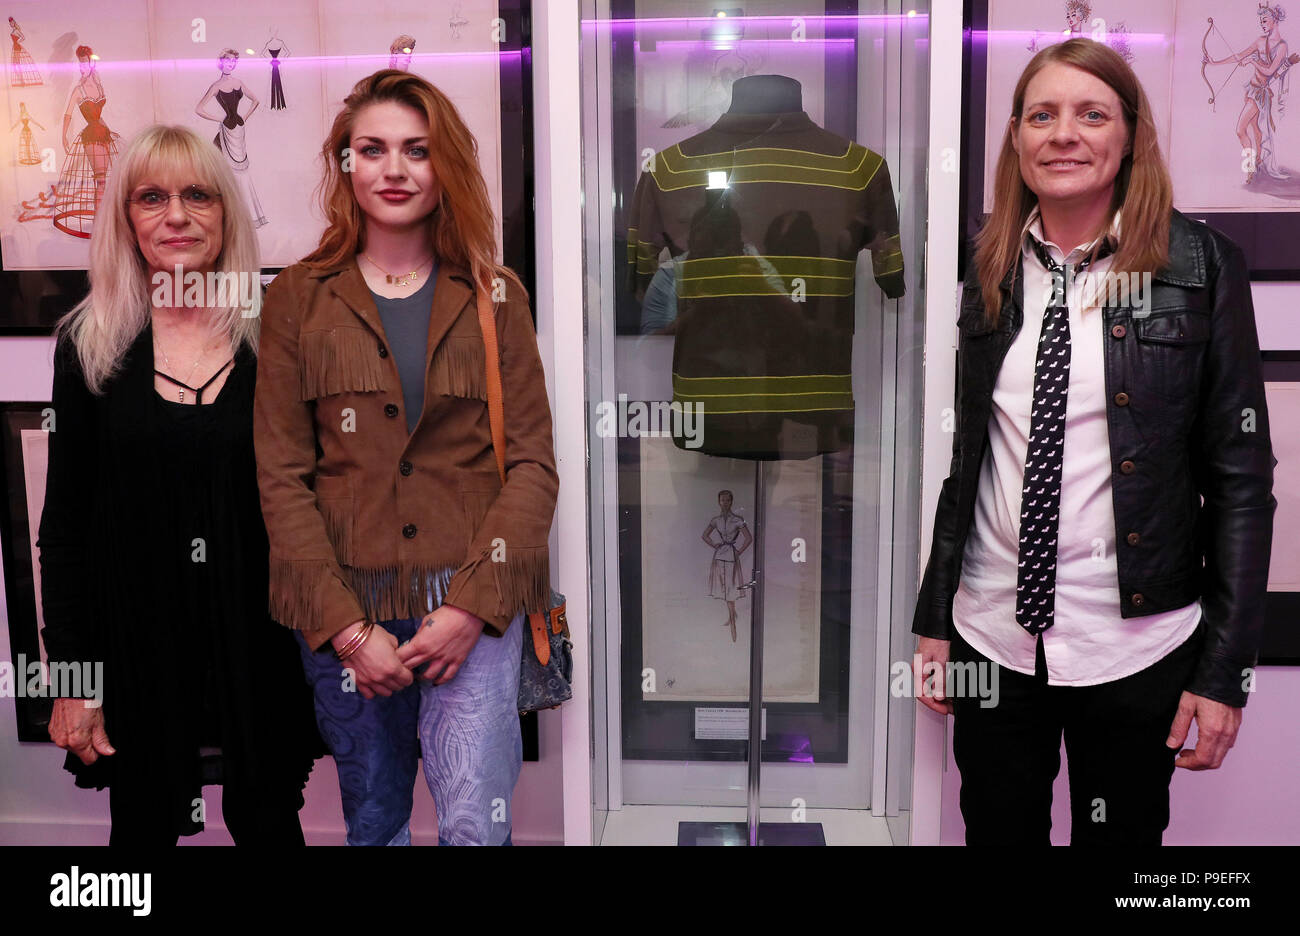 Kurt Cobain's mother Wendy O'Connor (left) daughter Frances Bean Cobain (centre) and sister Kim Cobain stand alongside his t-shirt worn in the 'Smells Like Teen Spirit' video, during the opening of the 'Growing Up Kurt' exhibition on the life of the Nirvana frontman, at the museum of Style Icons in Newbridge, Ireland. Stock Photo